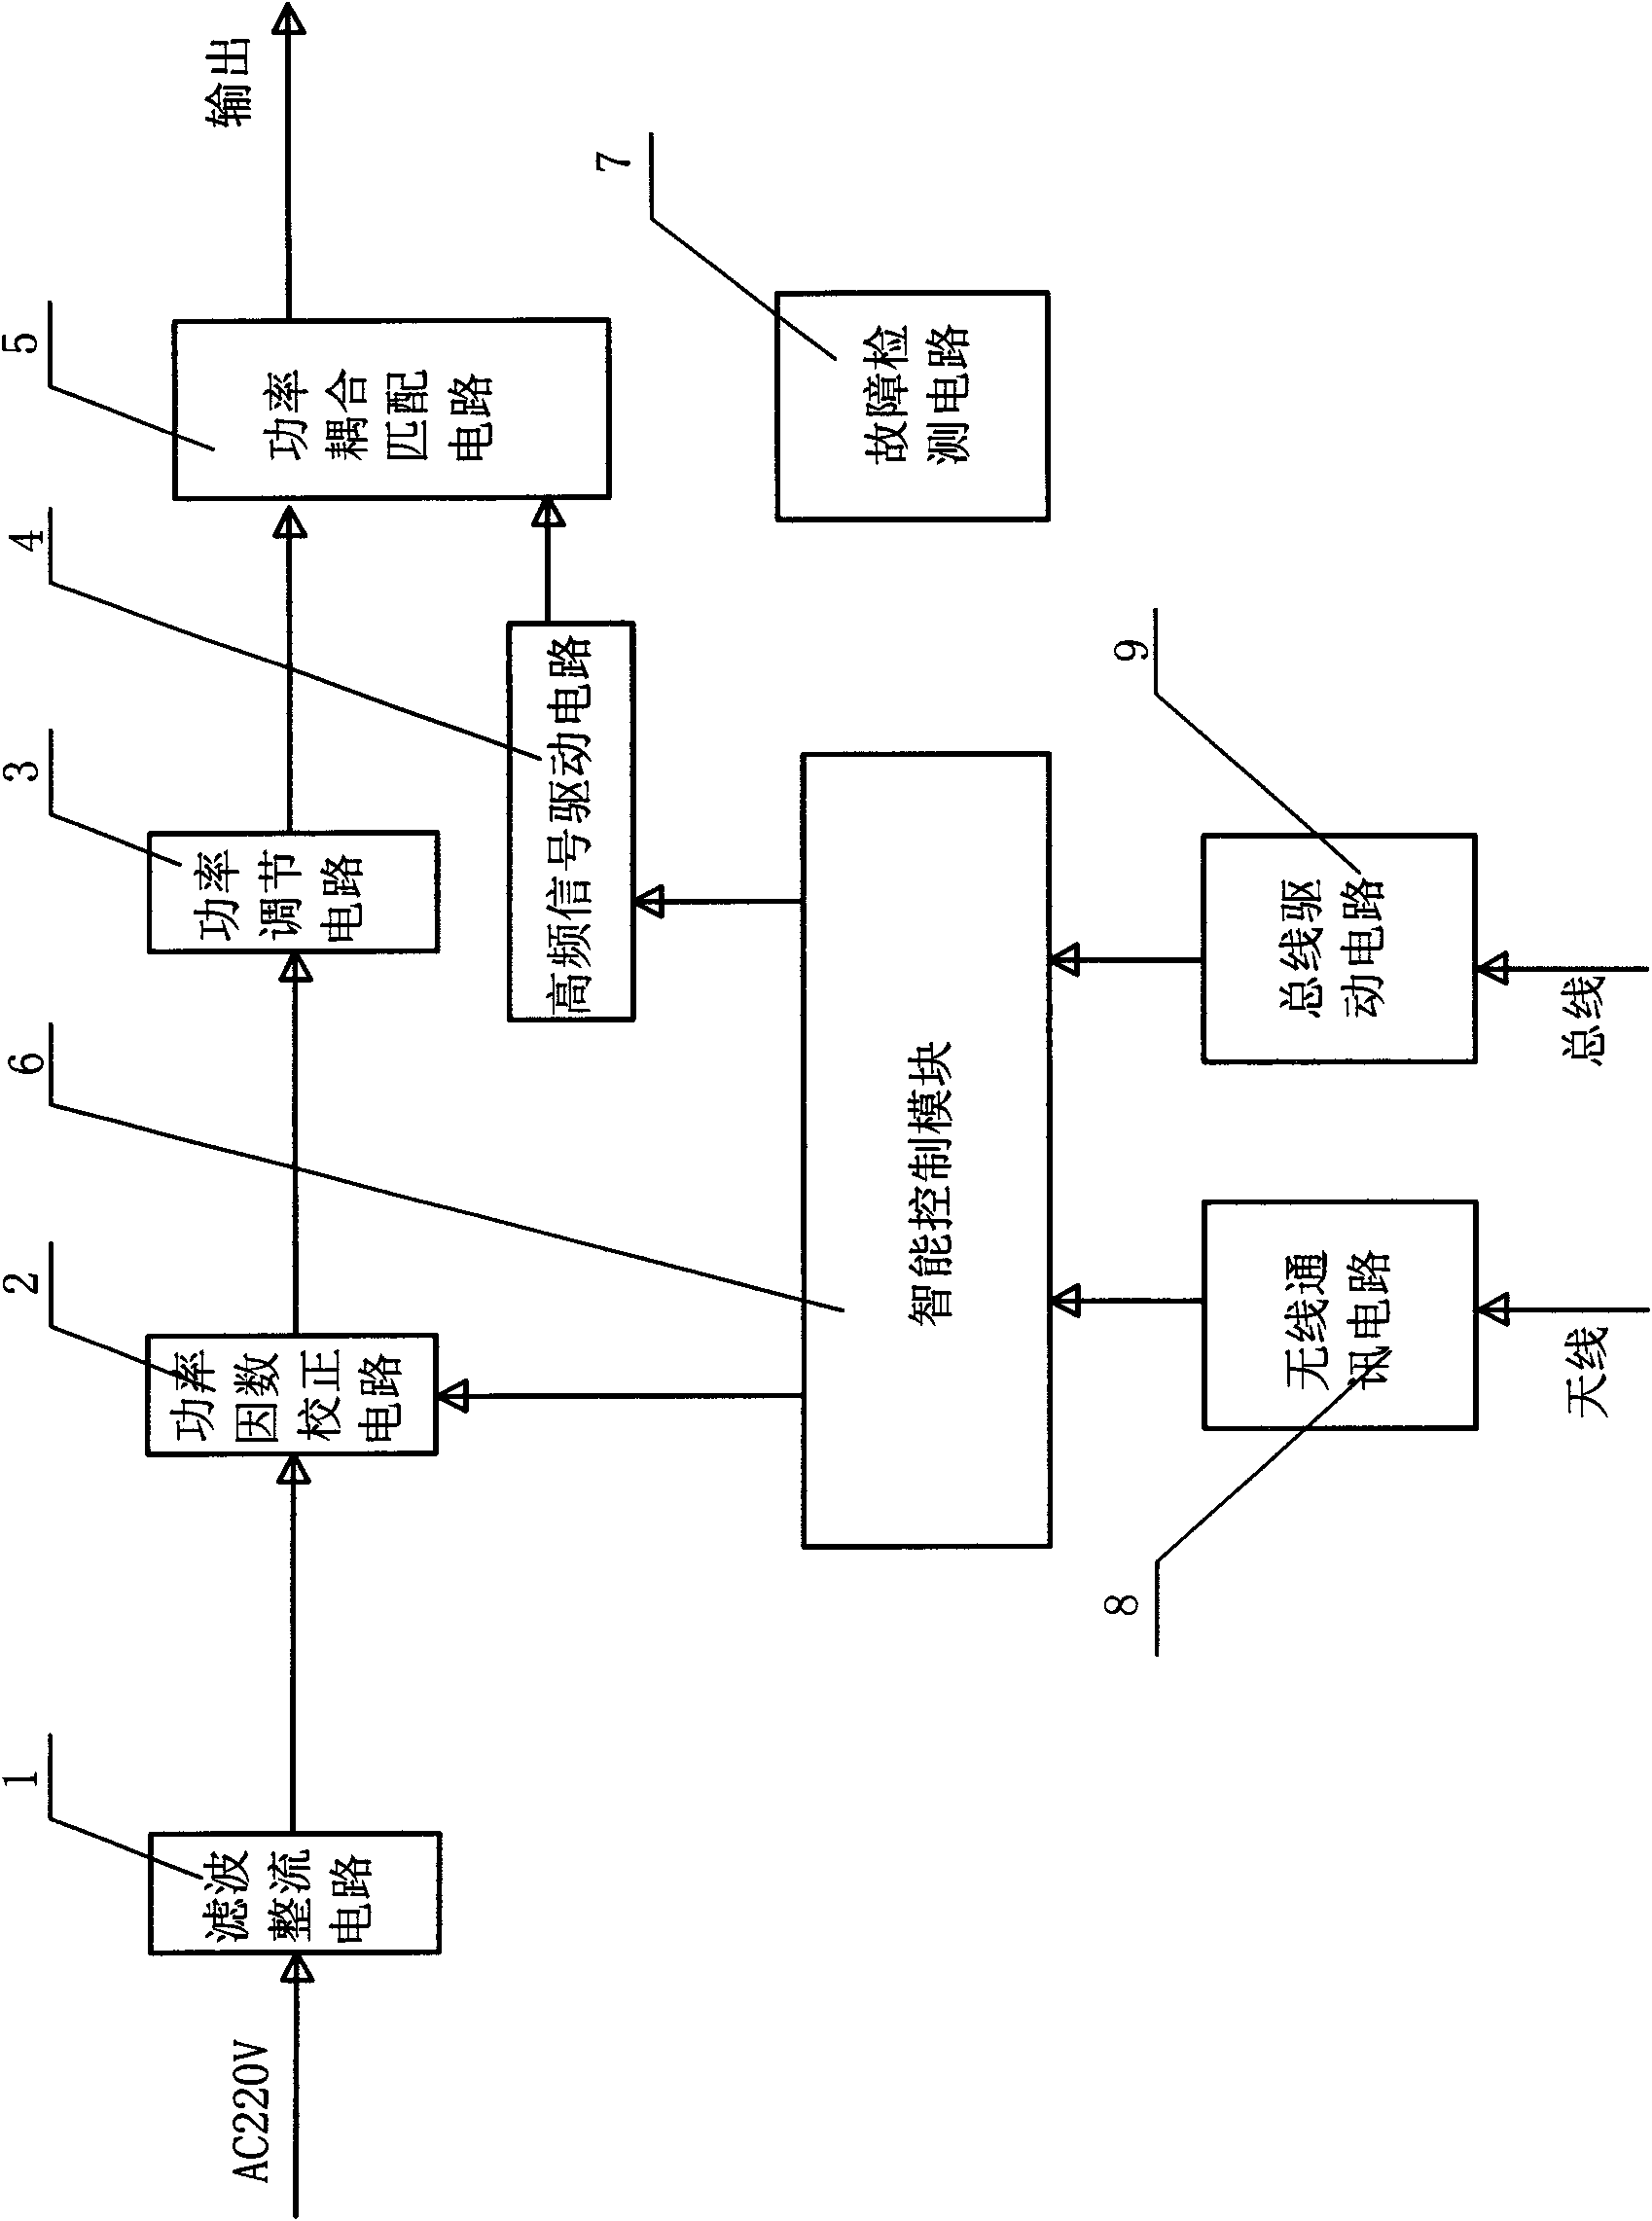 Power circuit for intelligent variable power high-frequency separately excited electromagnetic induction lamp